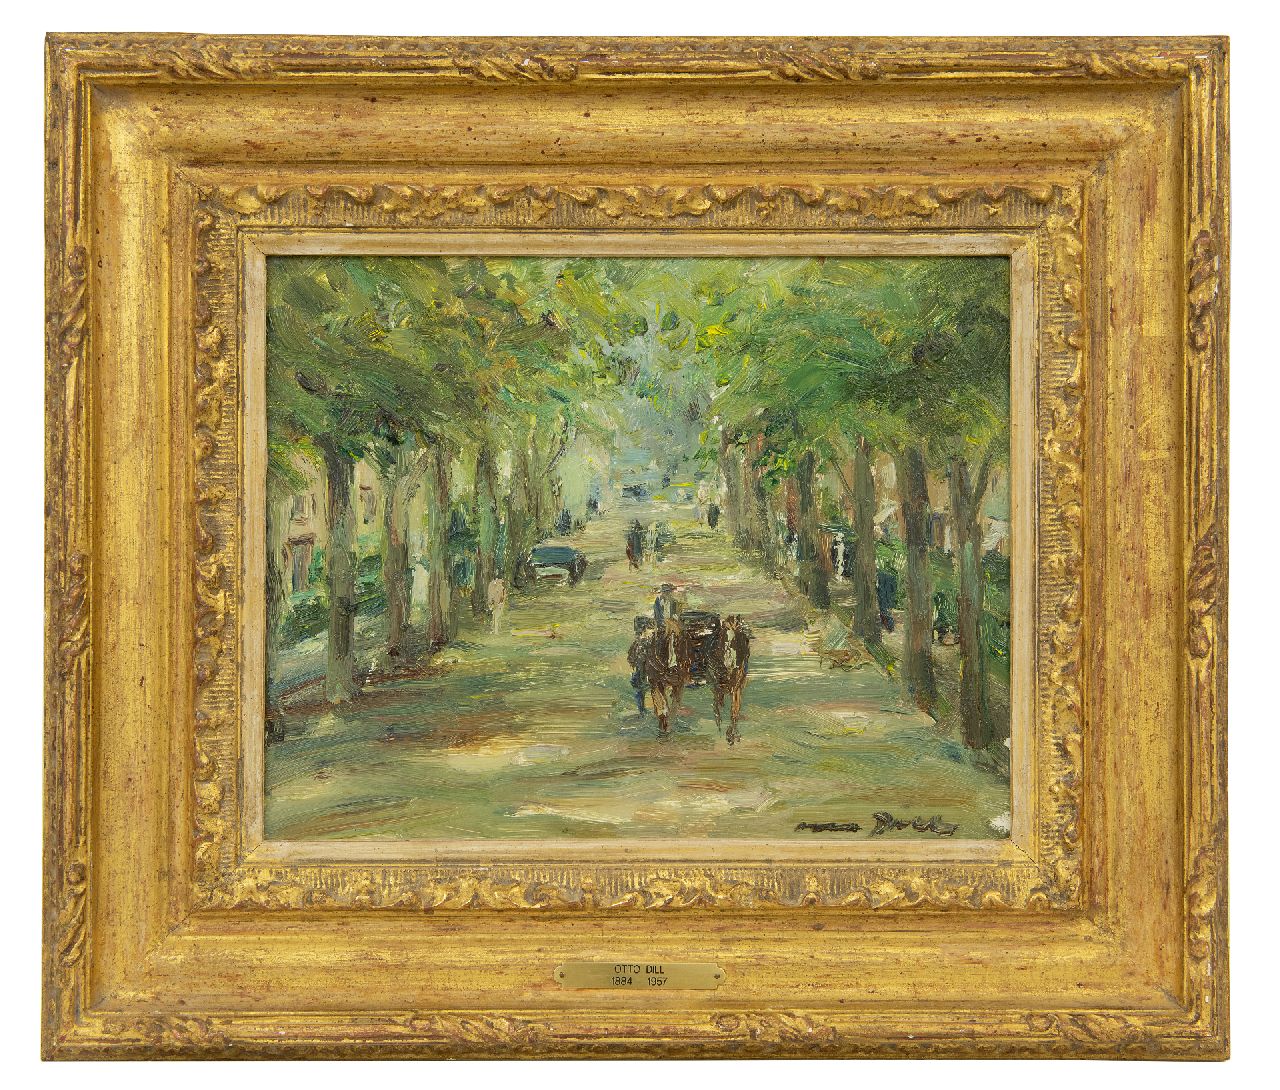 Dill O.C.W.  | Otto Carl Wilhelm Dill | Paintings offered for sale | Lichtentaler-Allee, Baden-Baden, oil on panel 22.6 x 28.7 cm, signed l.r.